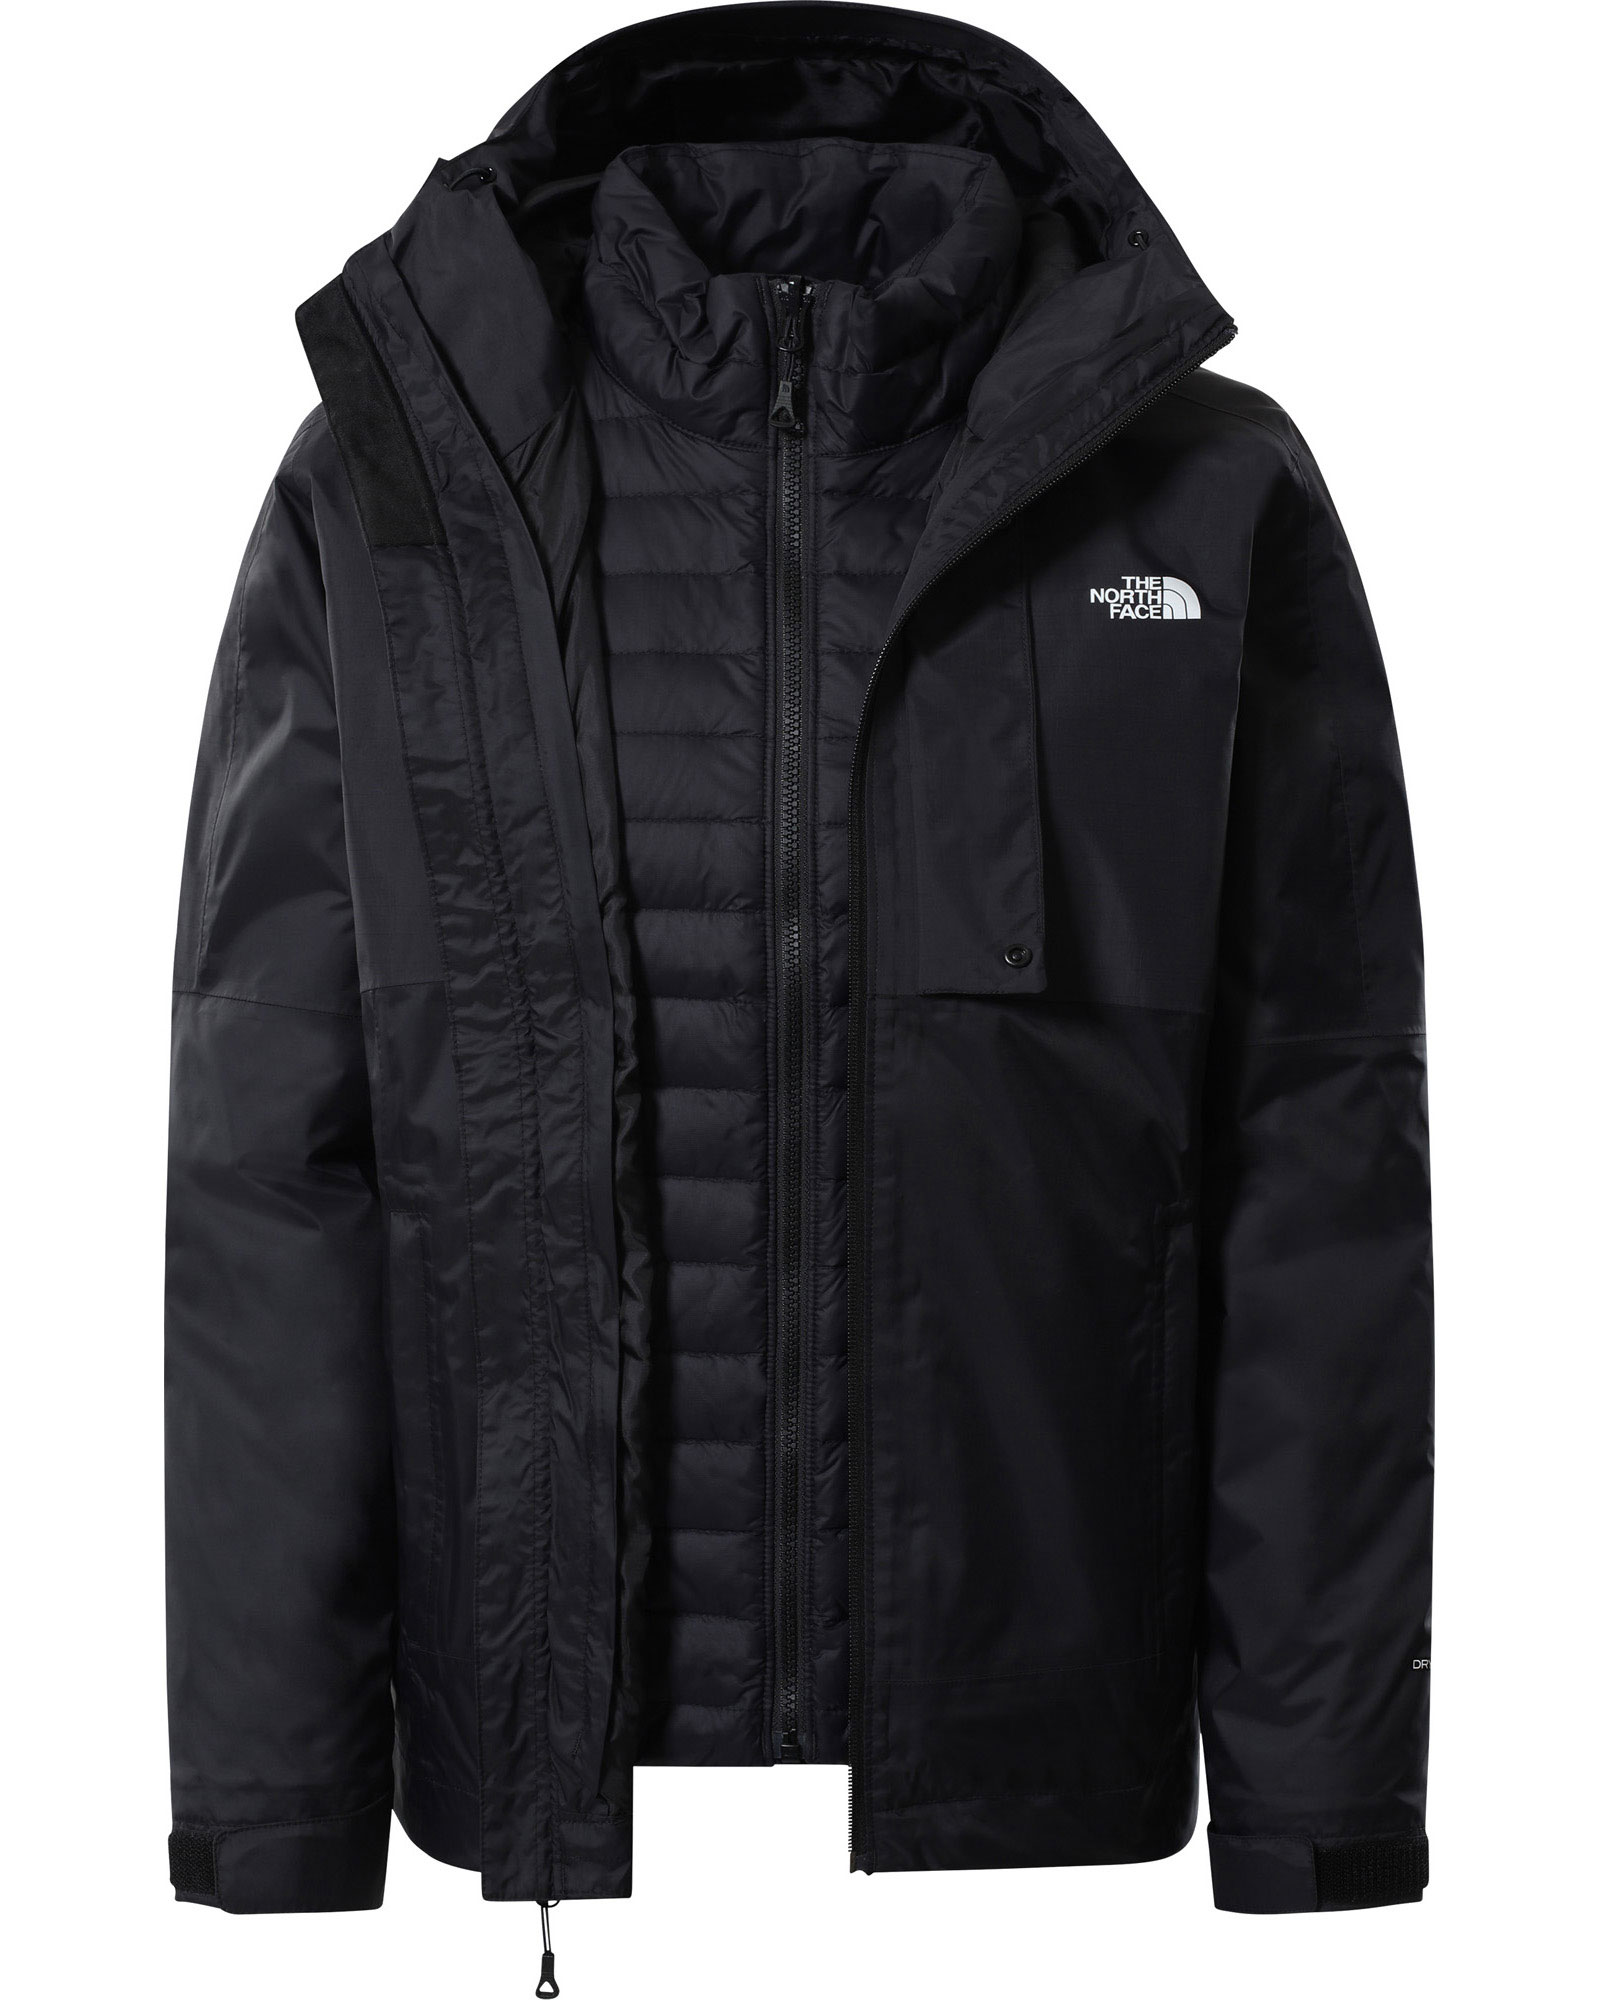 The North Face Down Insulated Triclimate Women’s Parka Jacket - TNF Black M